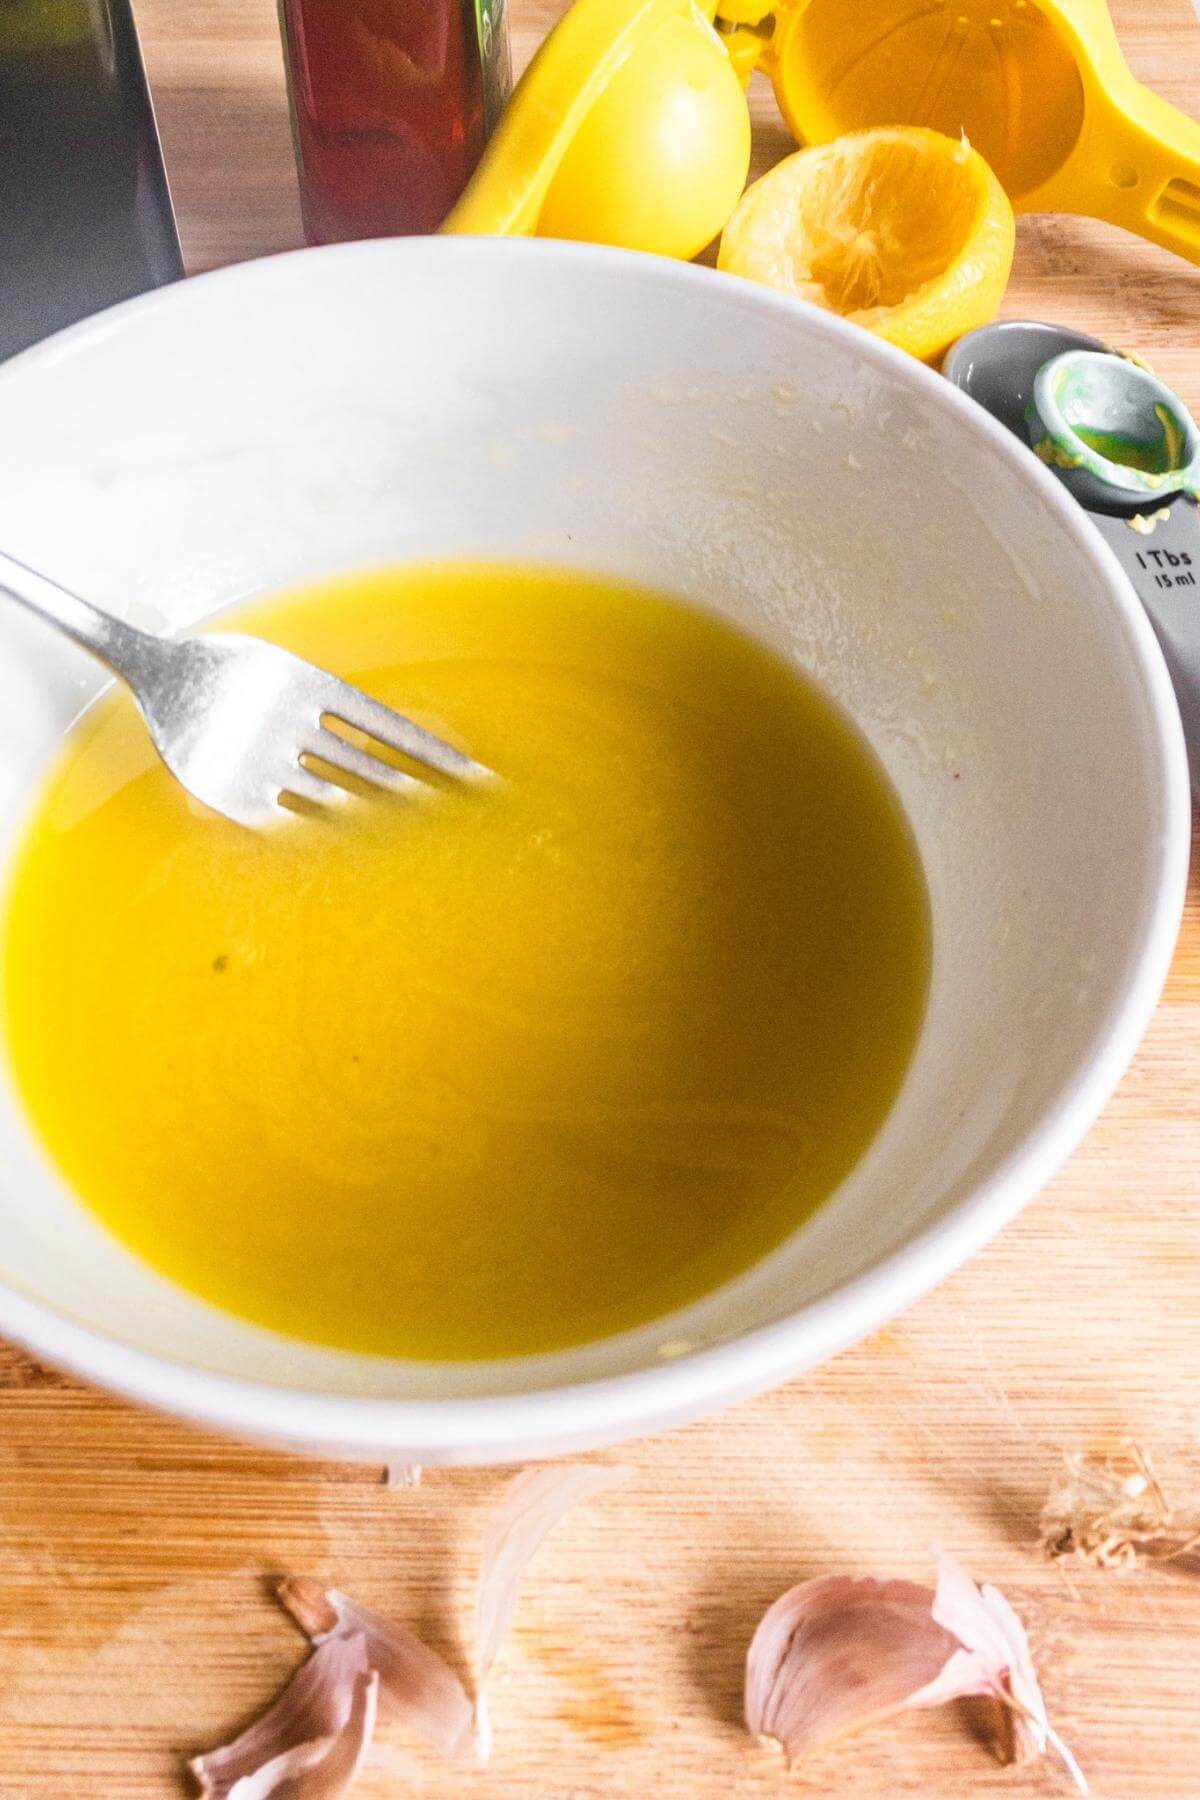 A salad dressing is being whisked up with a fork in a small bowl.